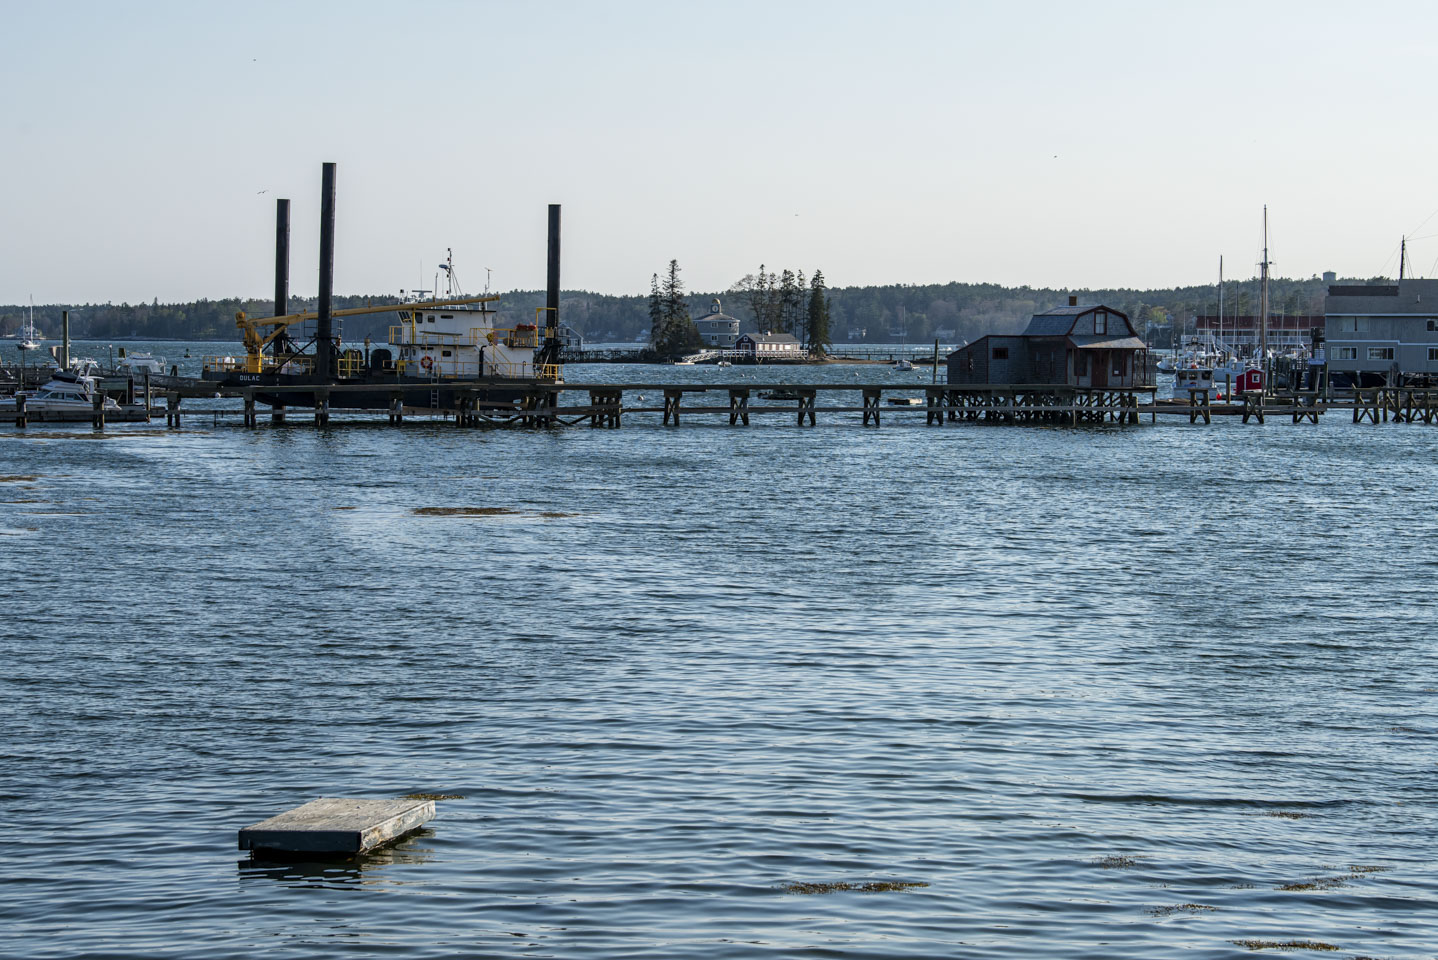 View across water to the Boothbay Harbor footbridge, which is under reconstruction